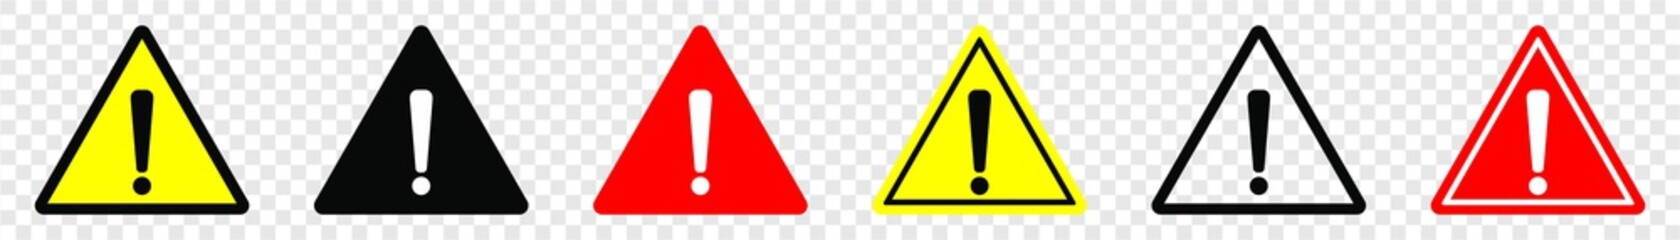 attention caution danger sign, exclamation mark sign, triangular warning symbols icon set, warning s